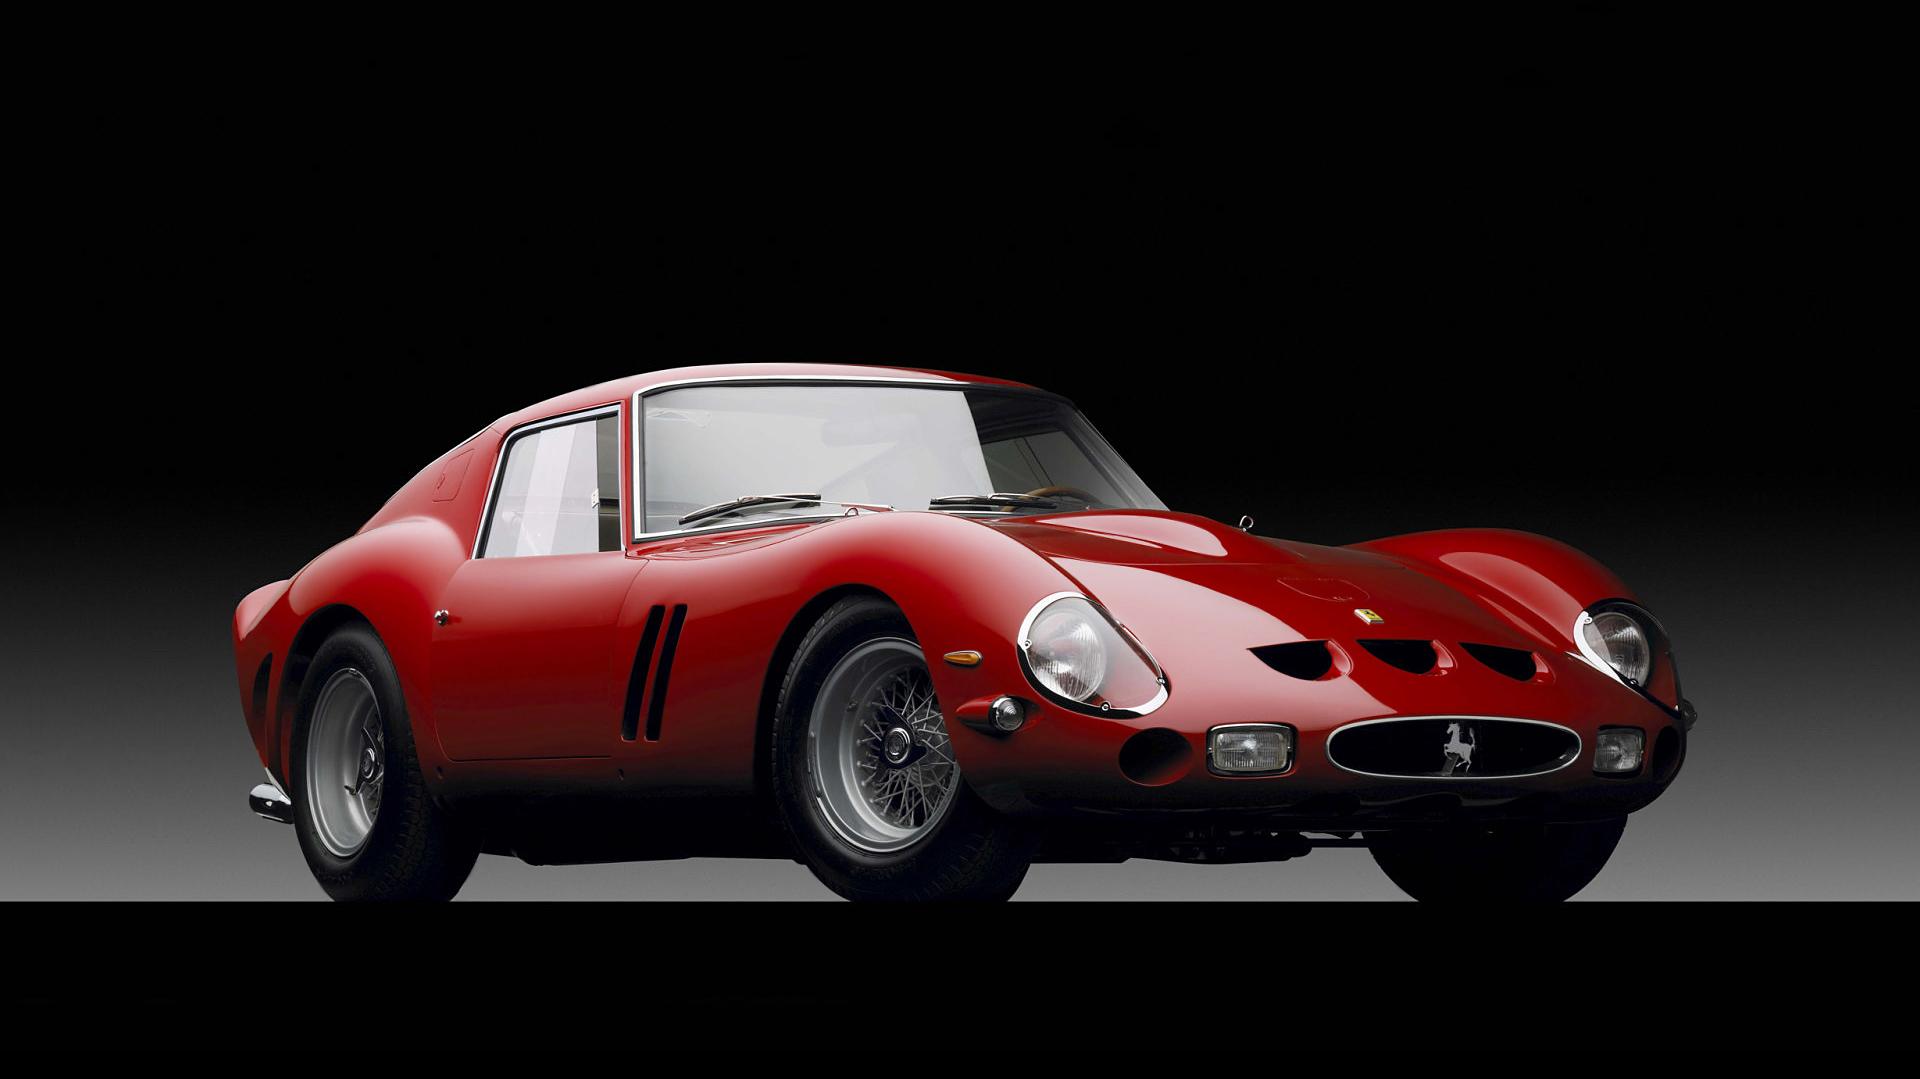 Ferrari Gto Acknowledged As A Work Of Art Majesty Time